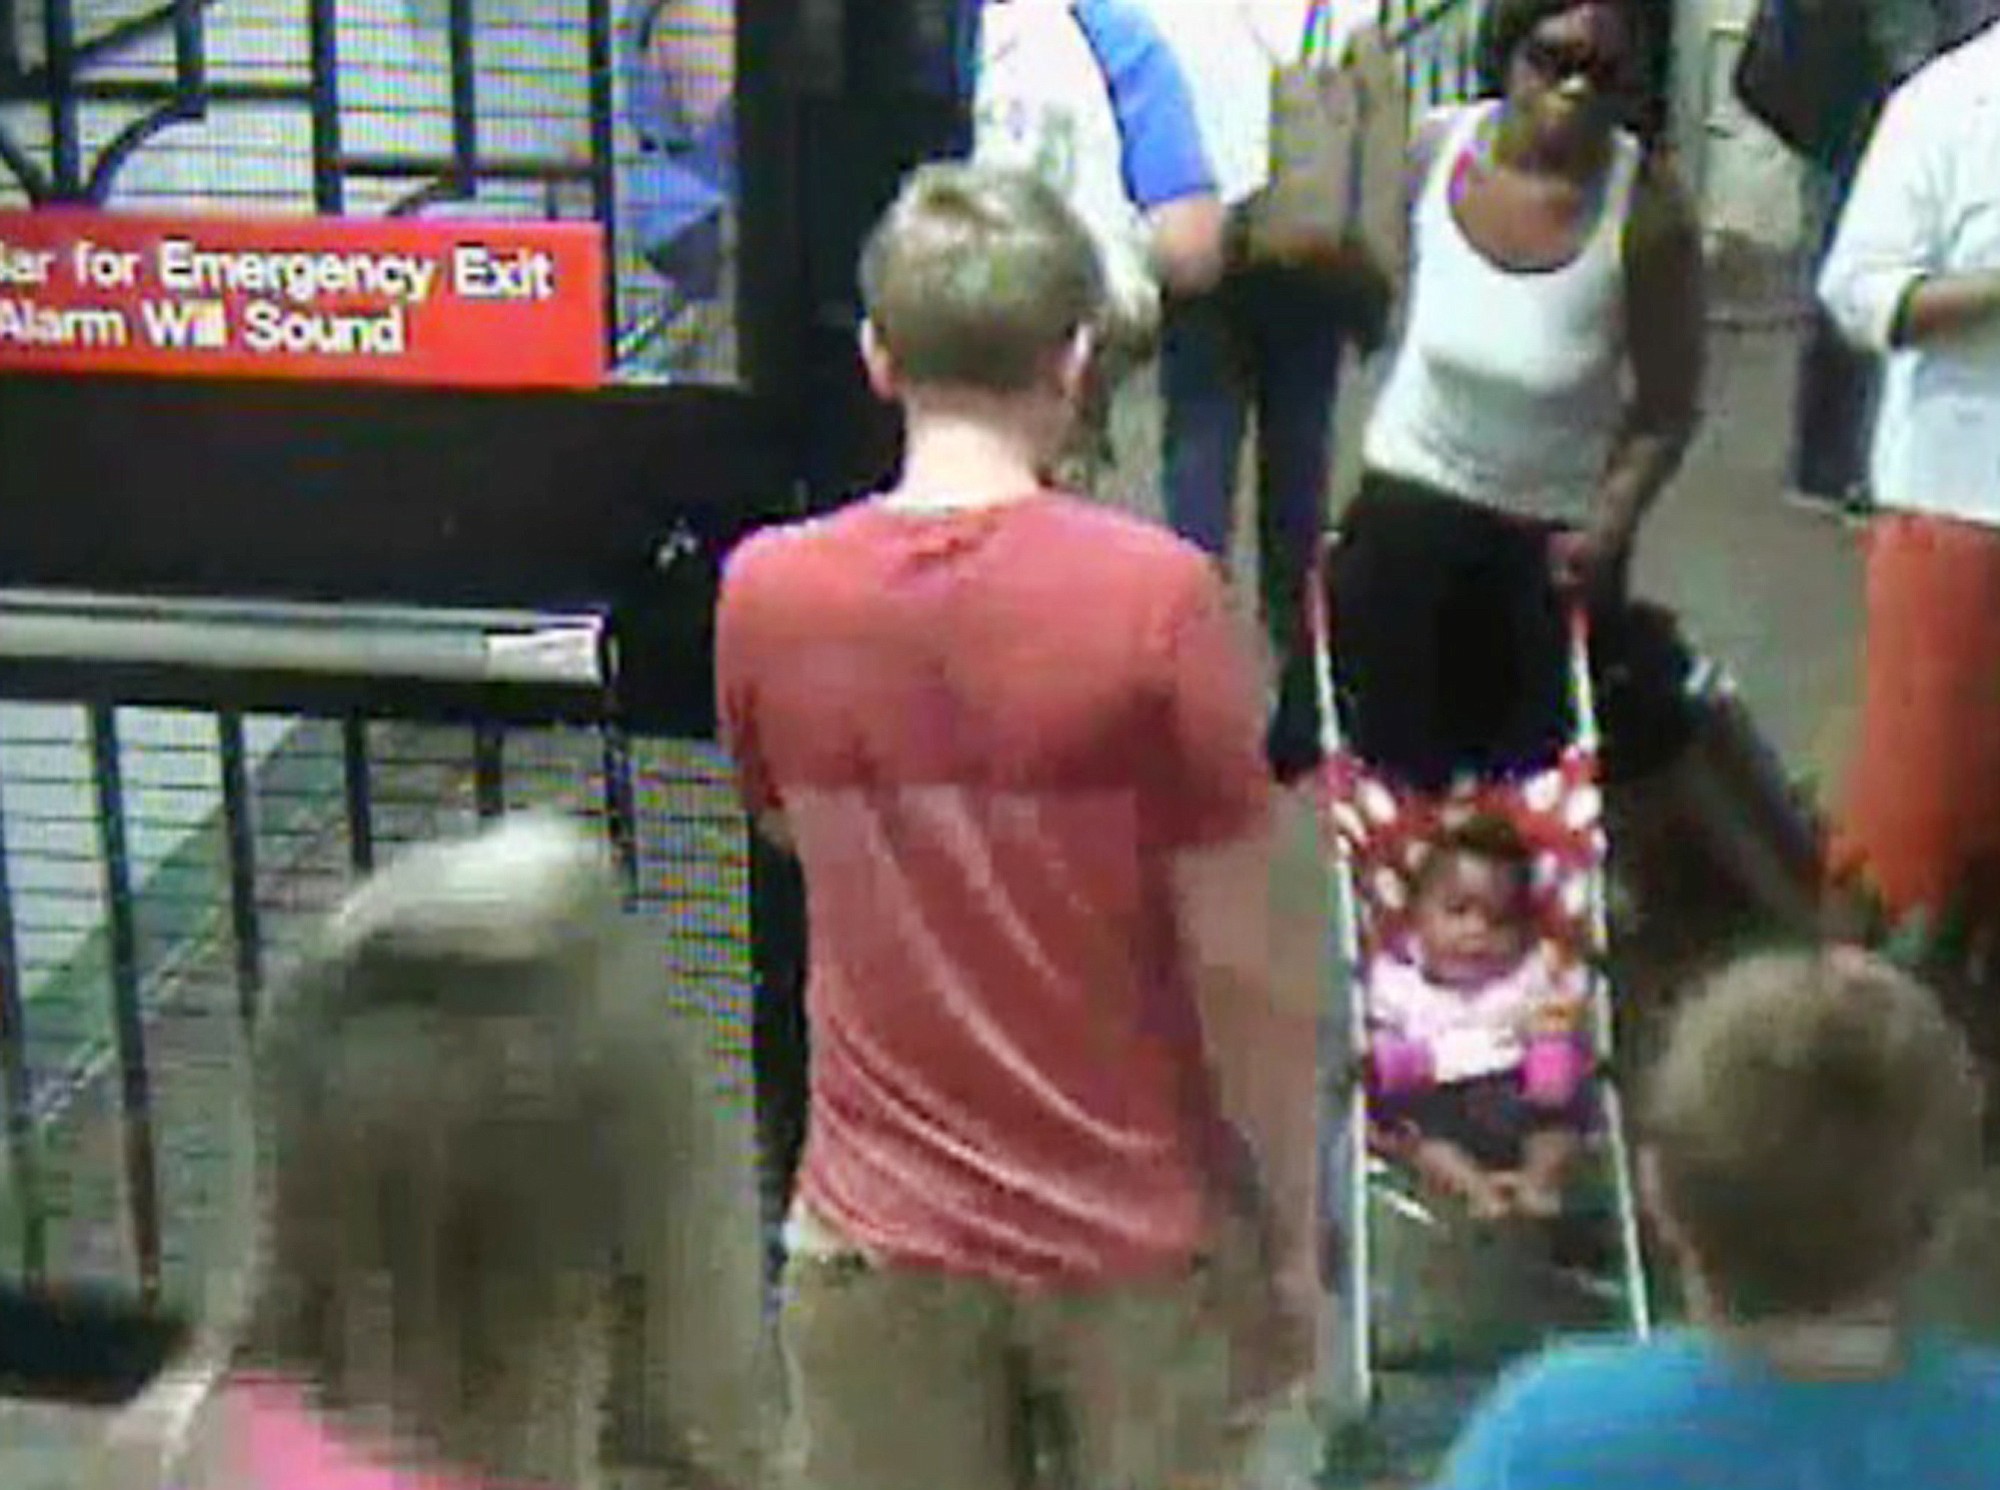 NYPD/Associated Press
In this surveillance camera image, a woman, top right, pushes her baby girl in a stroller at the Columbus Circle subway station in New York.